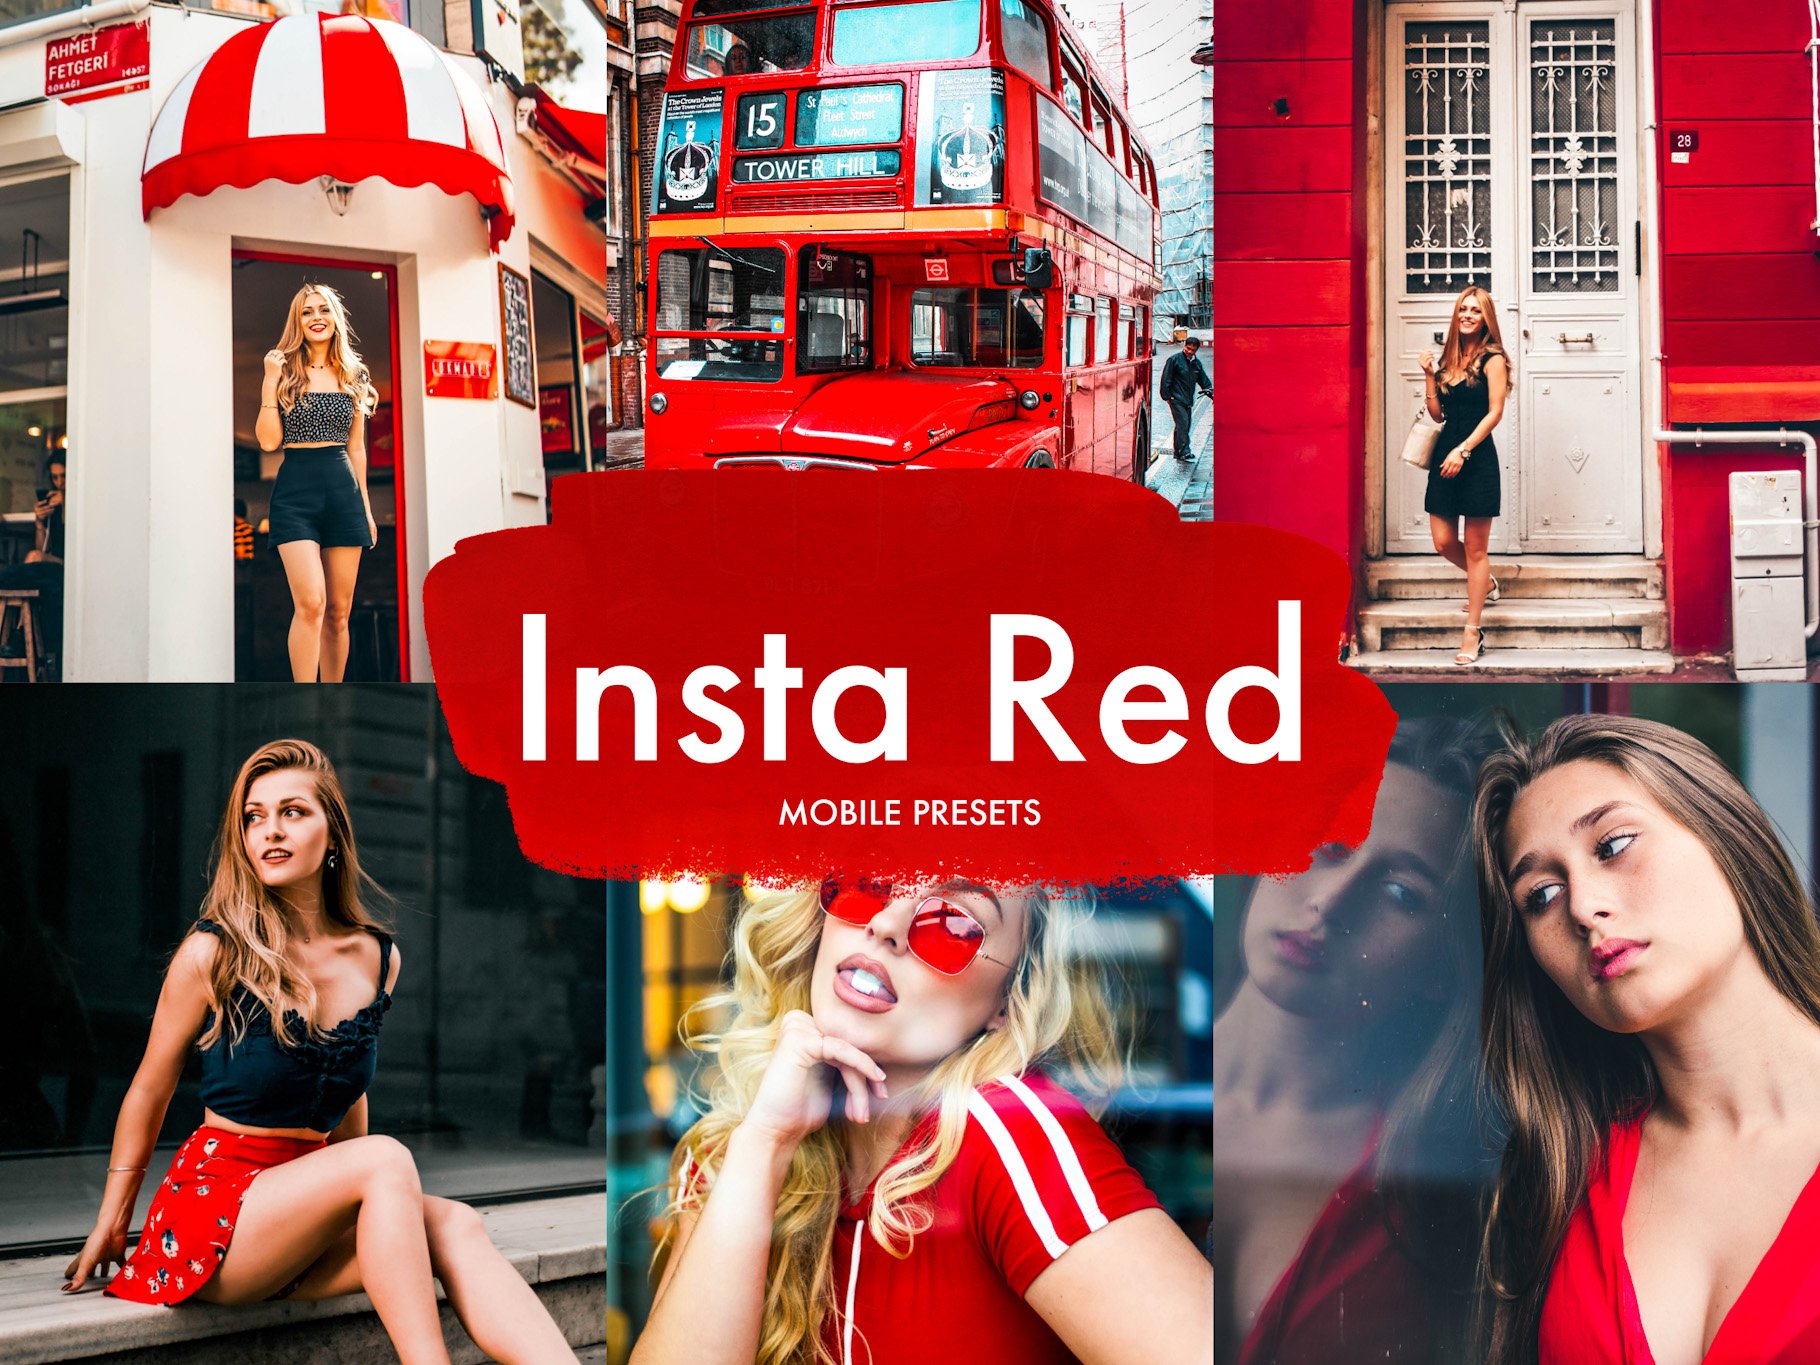 5 Insta Red Mobile Presetscover image.